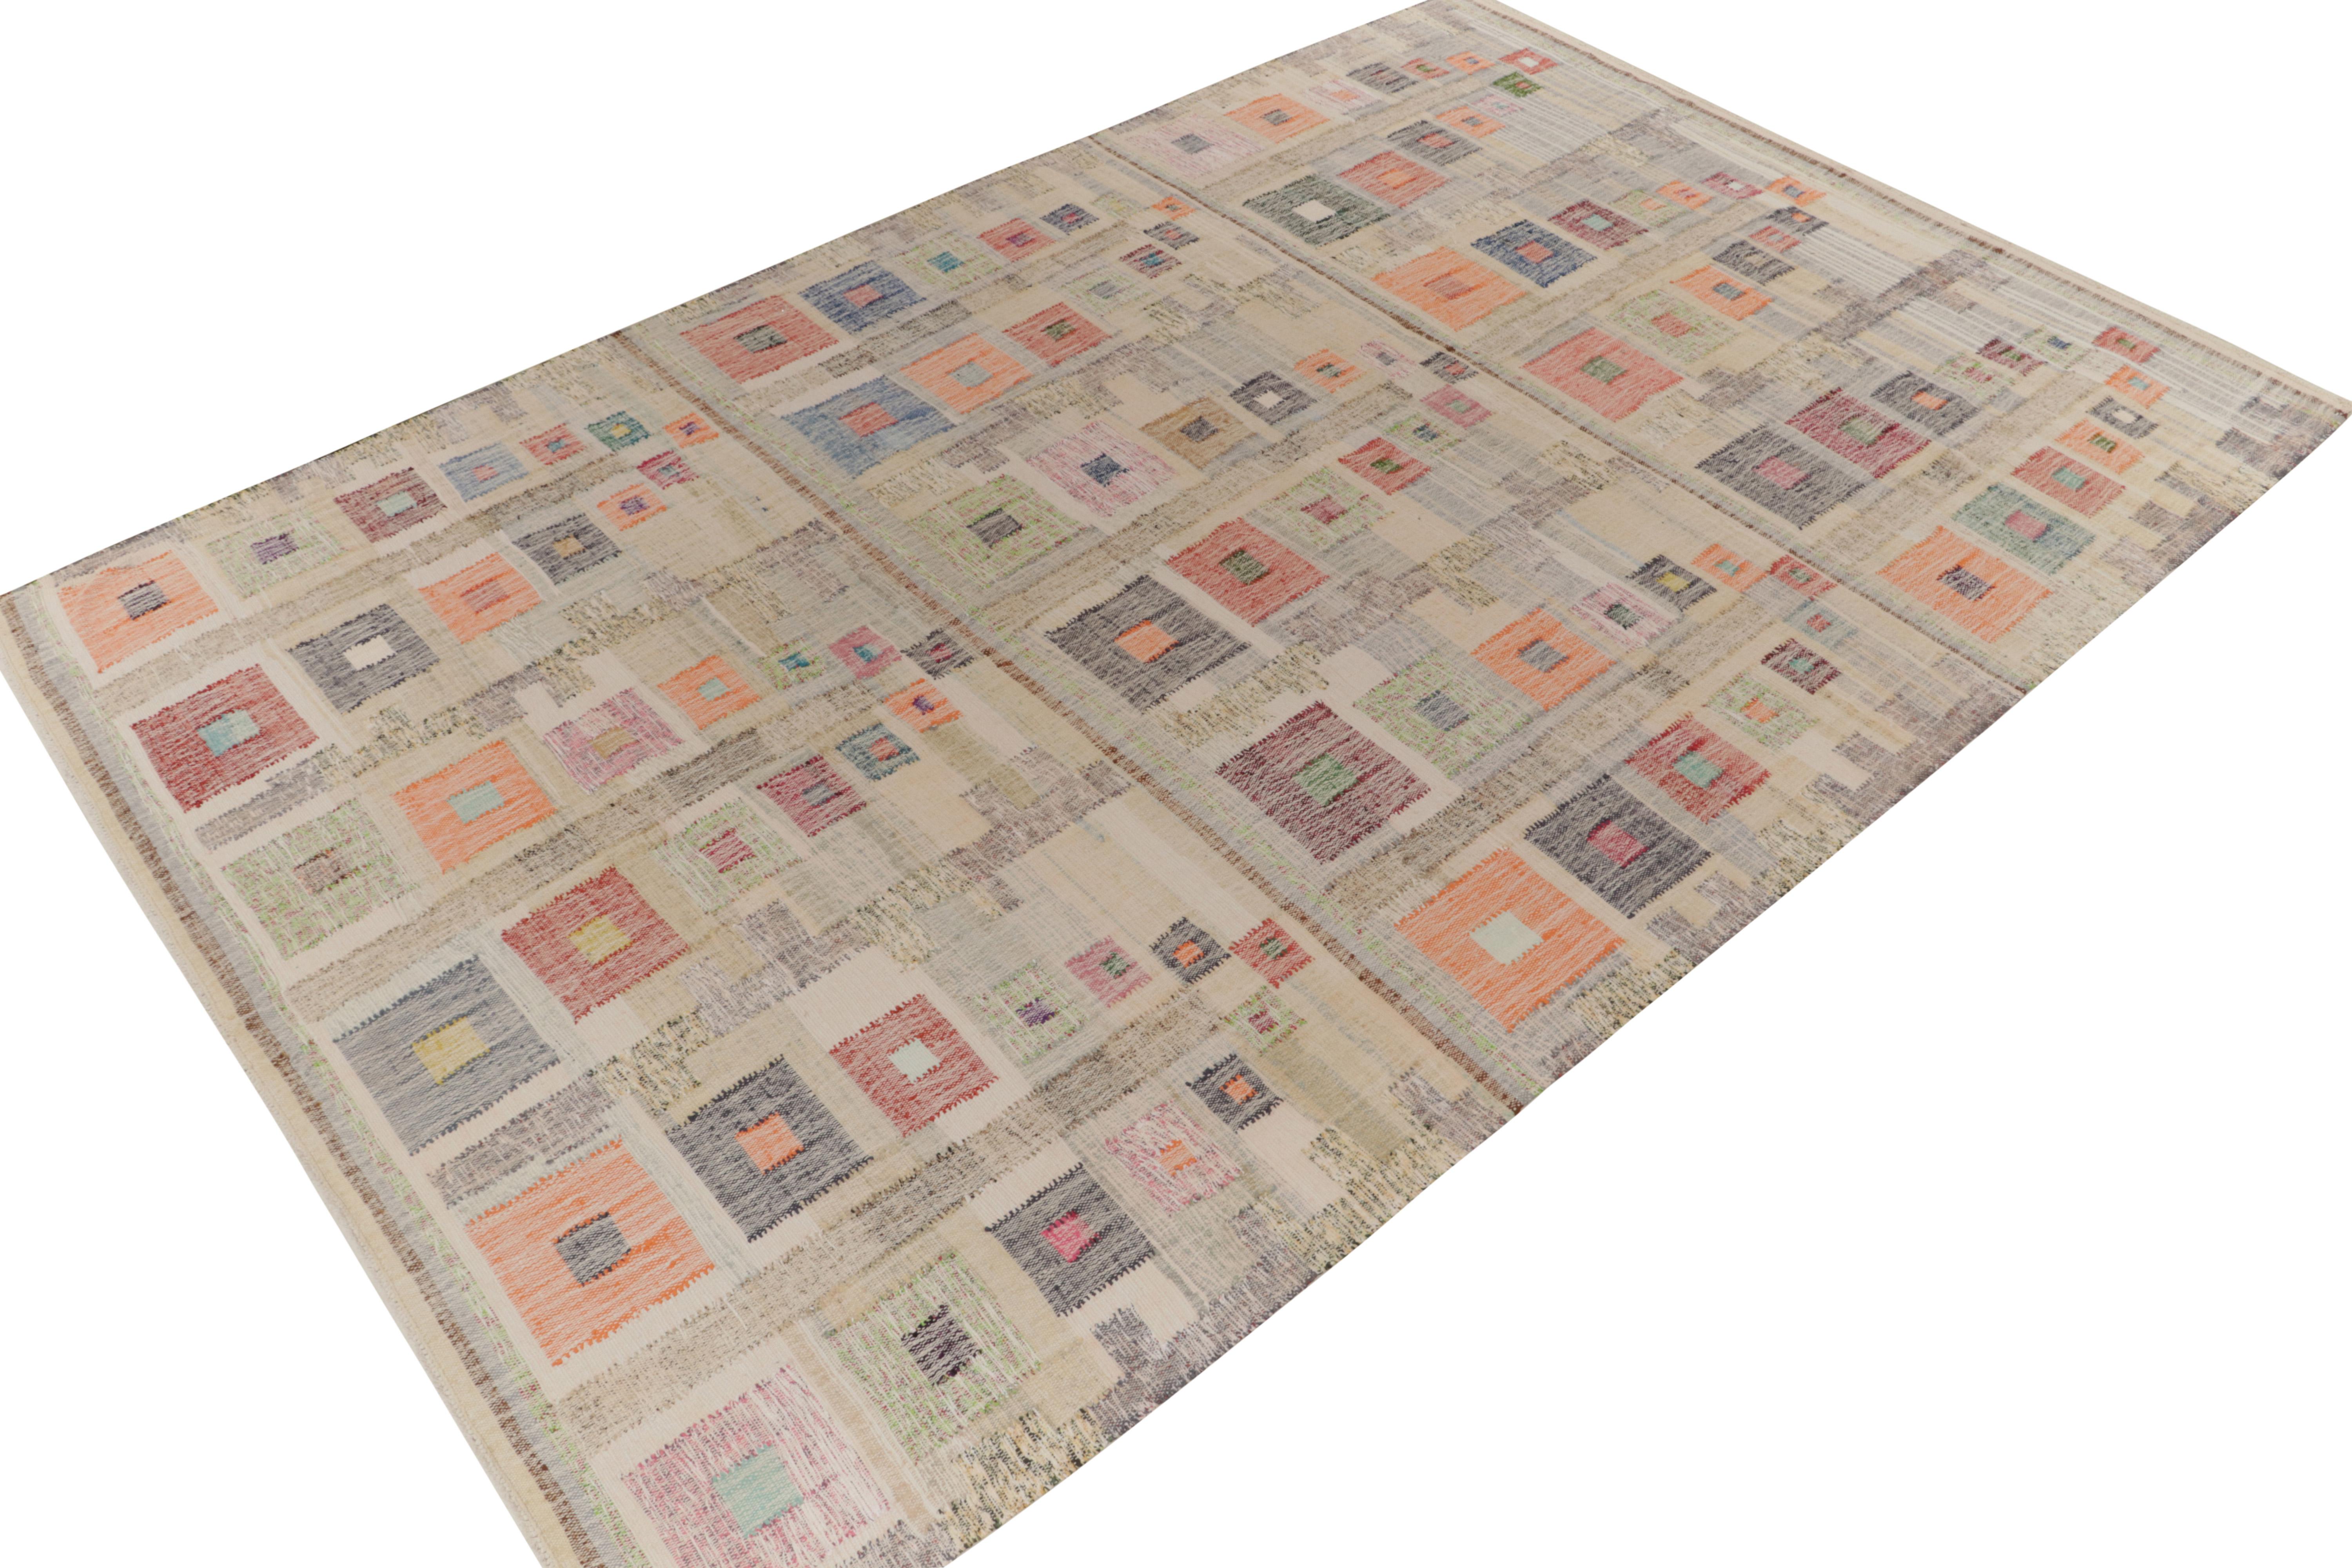 Handwoven in wool, this 10x15 modern patchwork kilim enjoys the exclusivity of Rug & Kilim’s exquisite library of vintage yarns. Exemplifying Principal Josh Nazmiyal’s artistic approach towards textural finesse & design innovation, this creation is